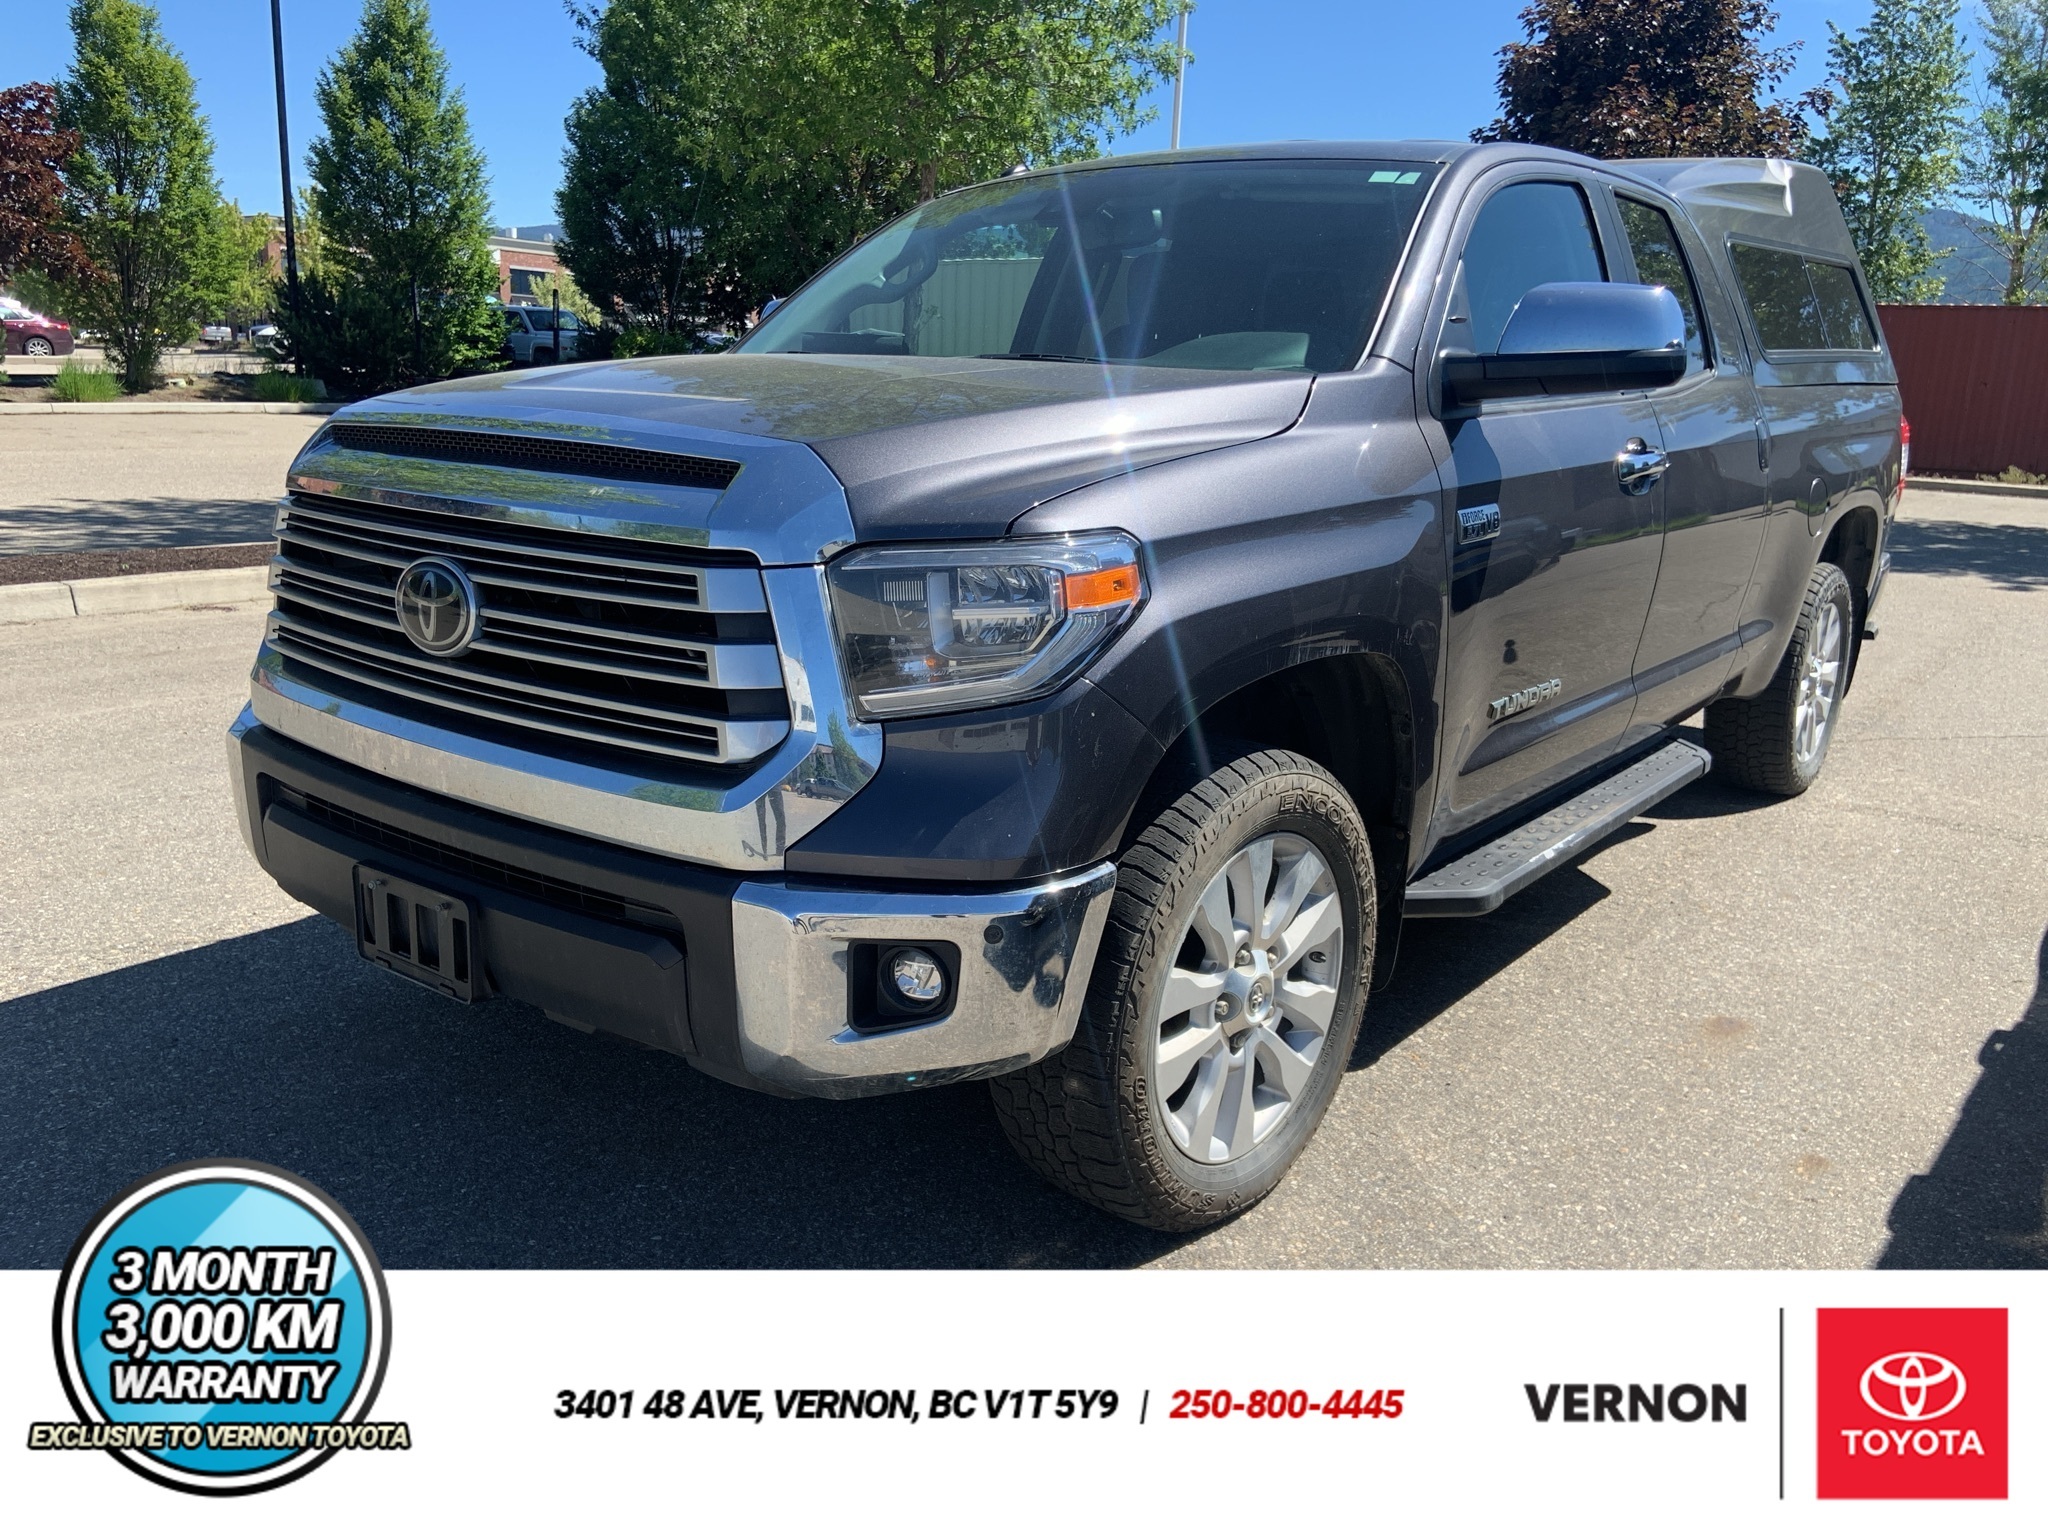 2018 Toyota Tundra 4x4 Double Cab Limited 5.7L